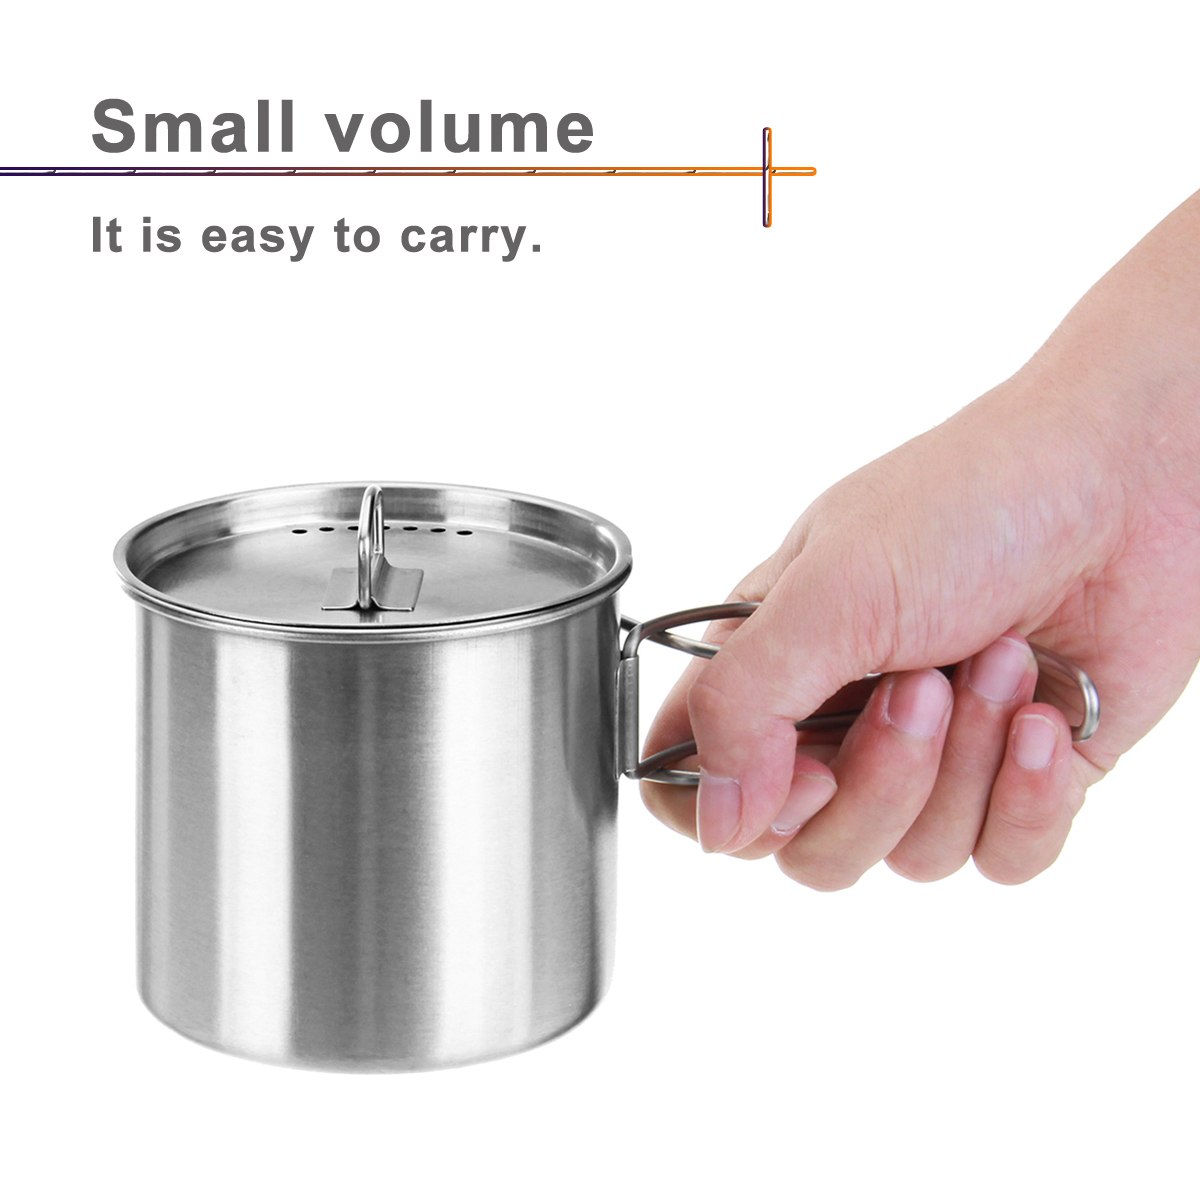 500ml Stainless Steel Water Mug Cup with Lid and Foldable Handle Outdoor Camping Pot Cooking Pots Picnic Hang Pot